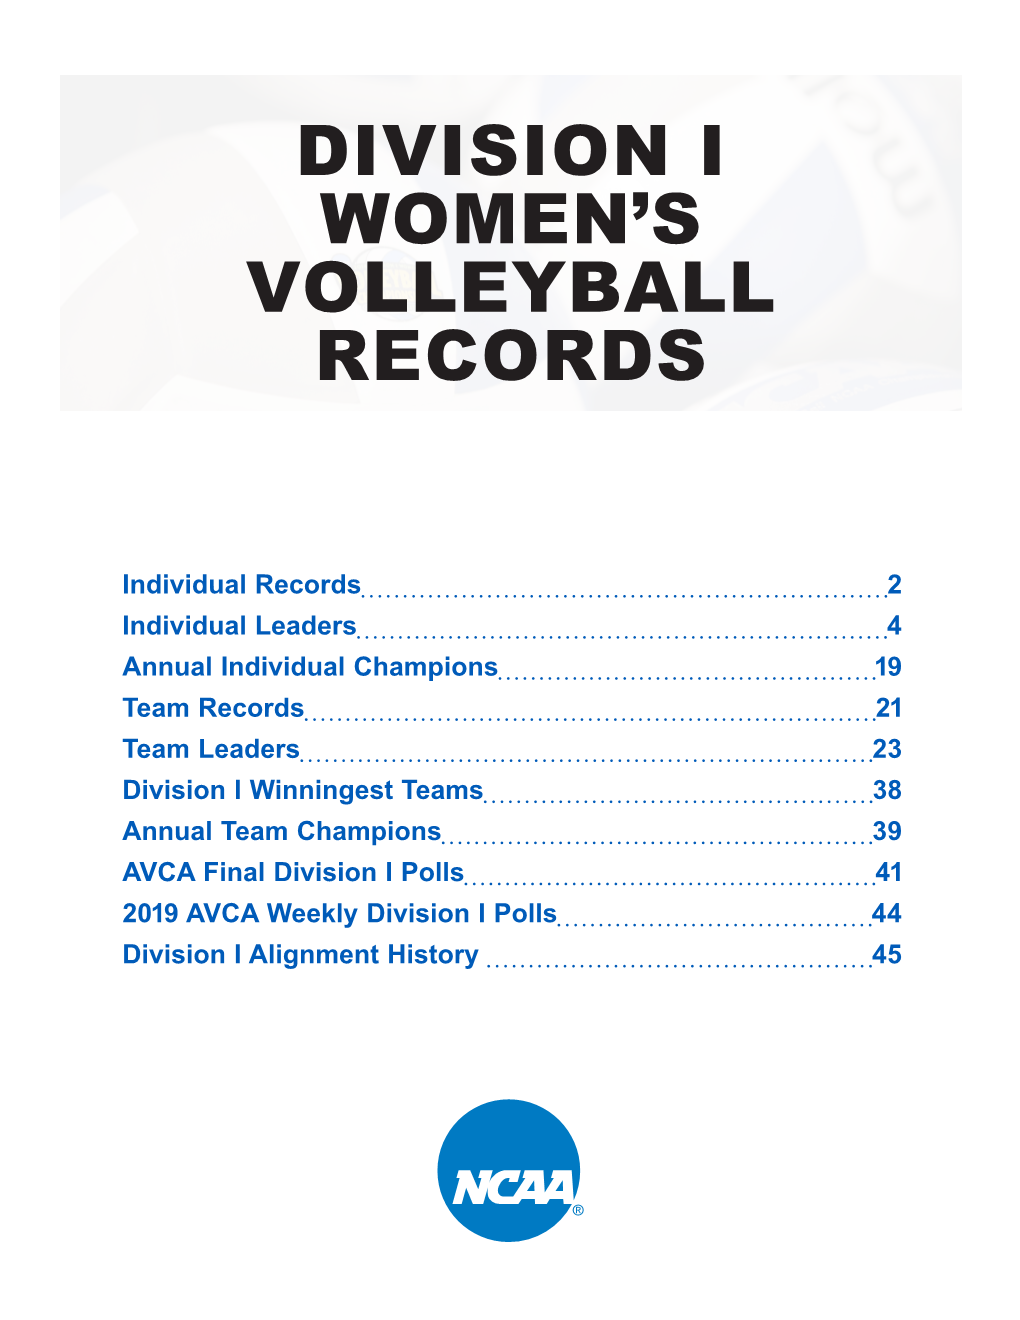 Division I Women's Volleyball Records